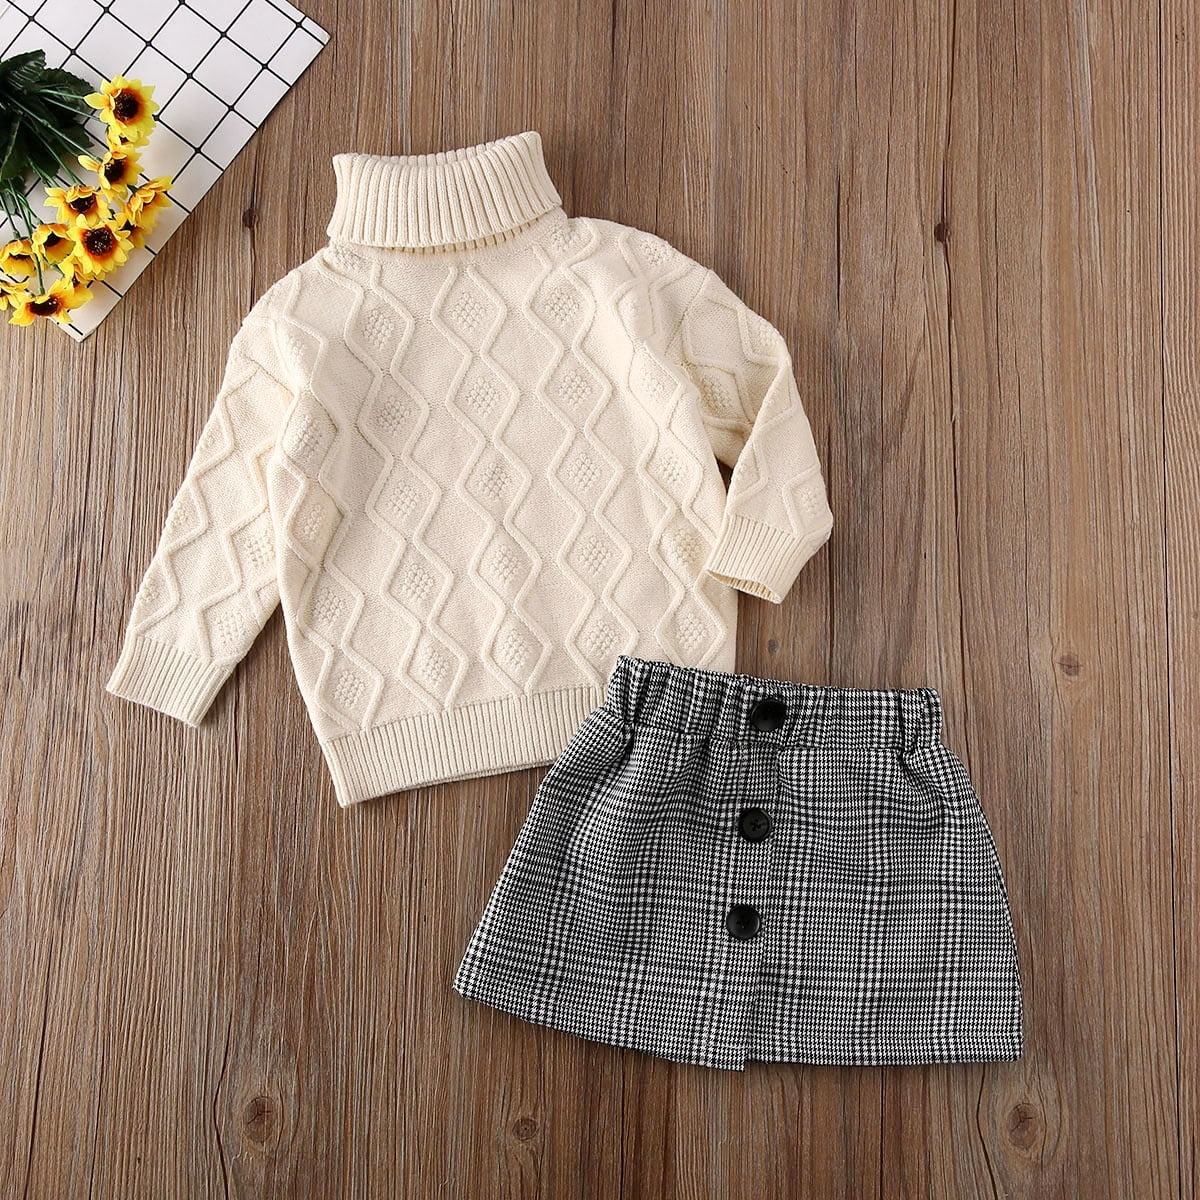 Toddler Kids Baby Girl Clothes Set Turtleneck Knitwear Sweater Tops Pleated Mini Skirt 2Pcs Outfits Set Casual Long Sleeve 